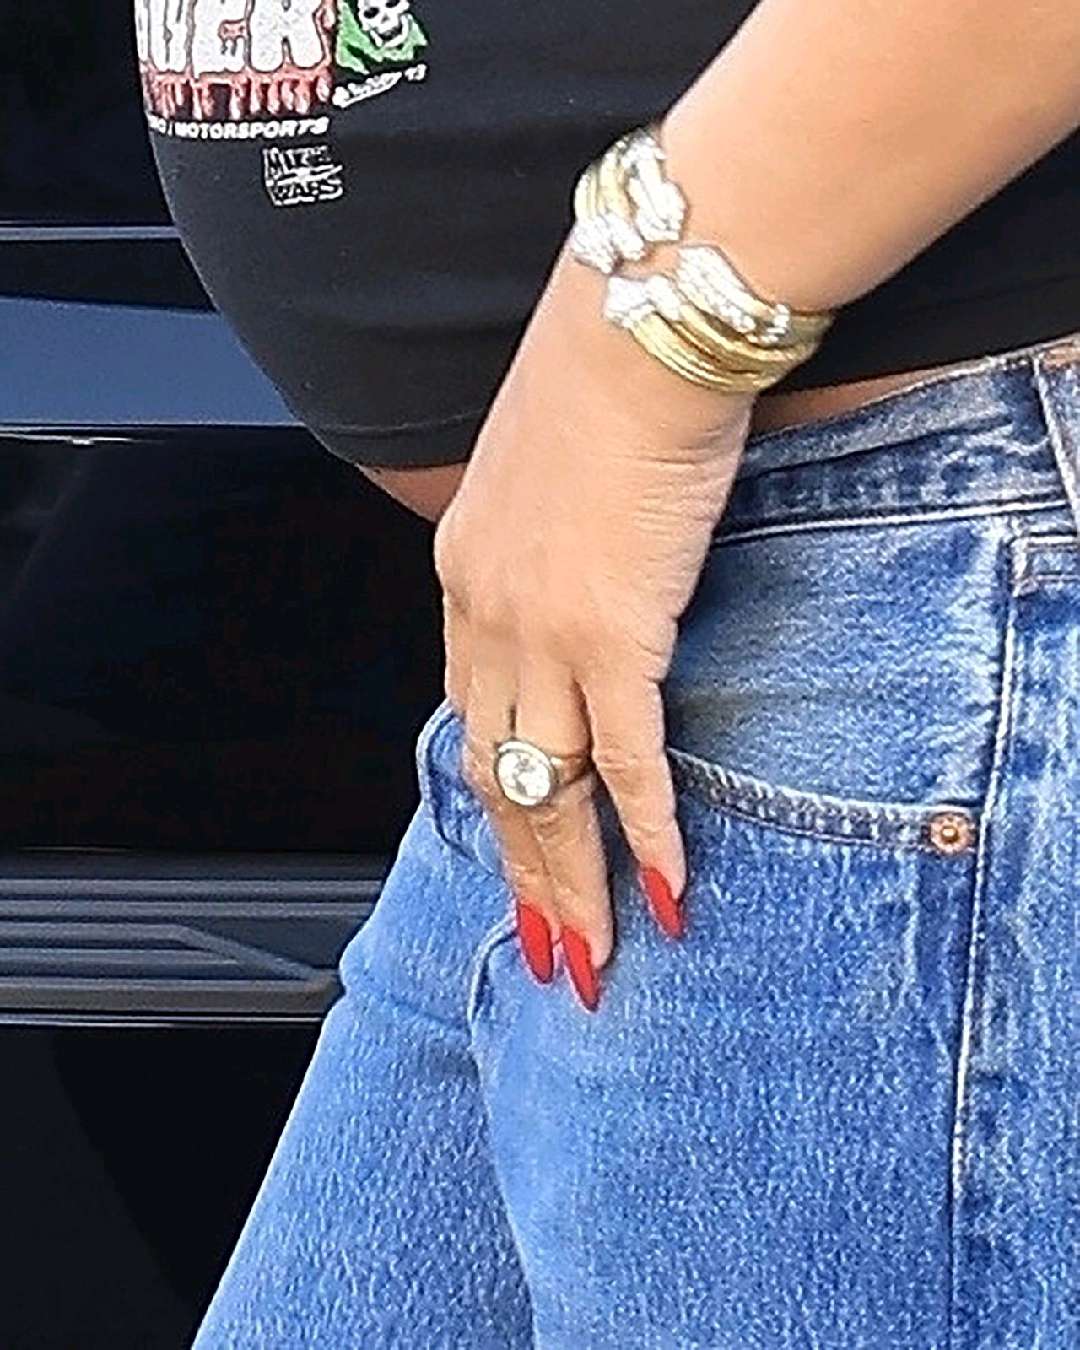 PREGNANT RIHANNA WEARS HUGE DIAMOND RING WHILE SHOPPING FOR BABY CLOTHES.